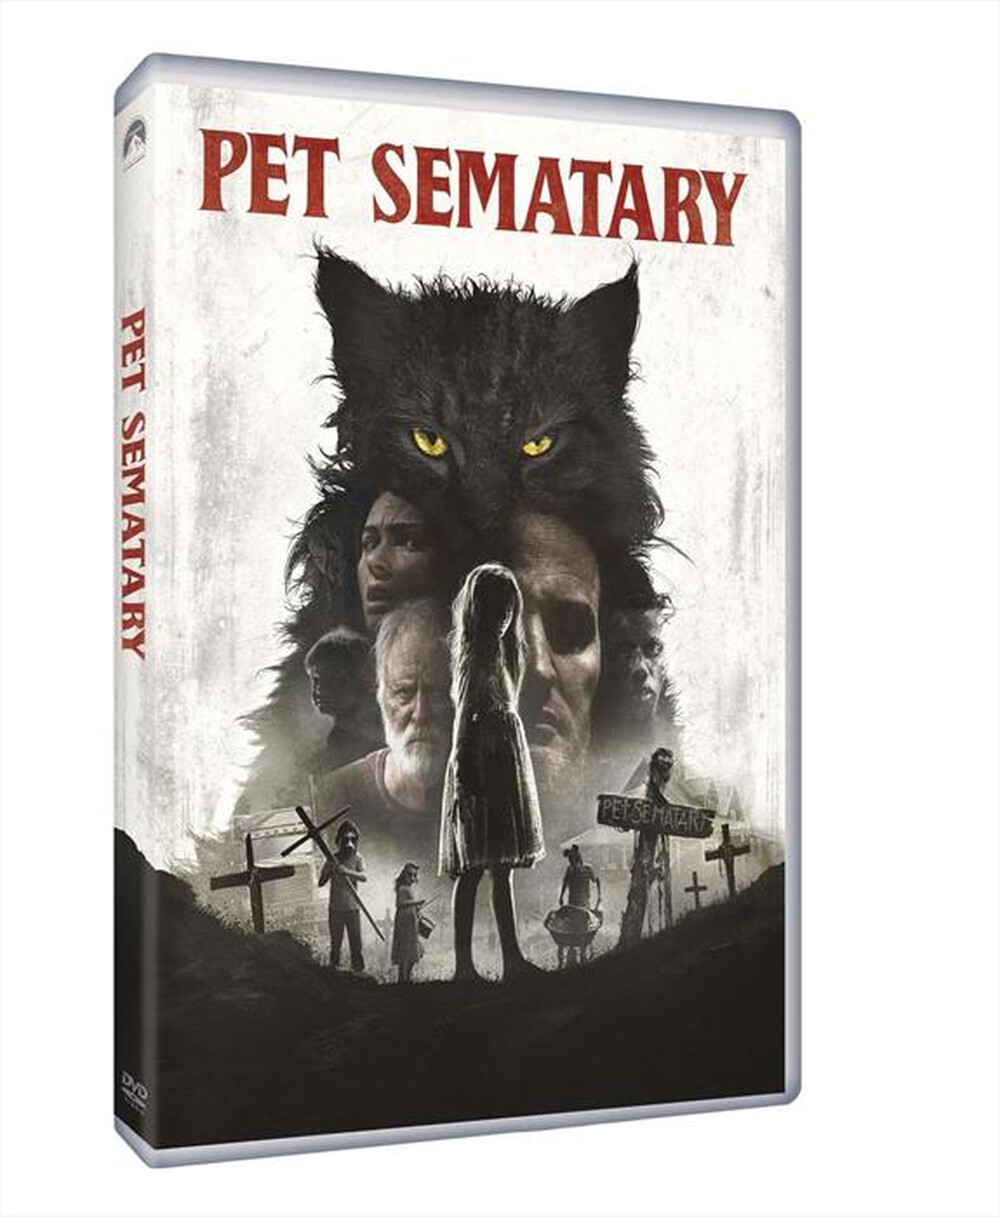 "UNIVERSAL PICTURES - Pet Sematary (2019) - "